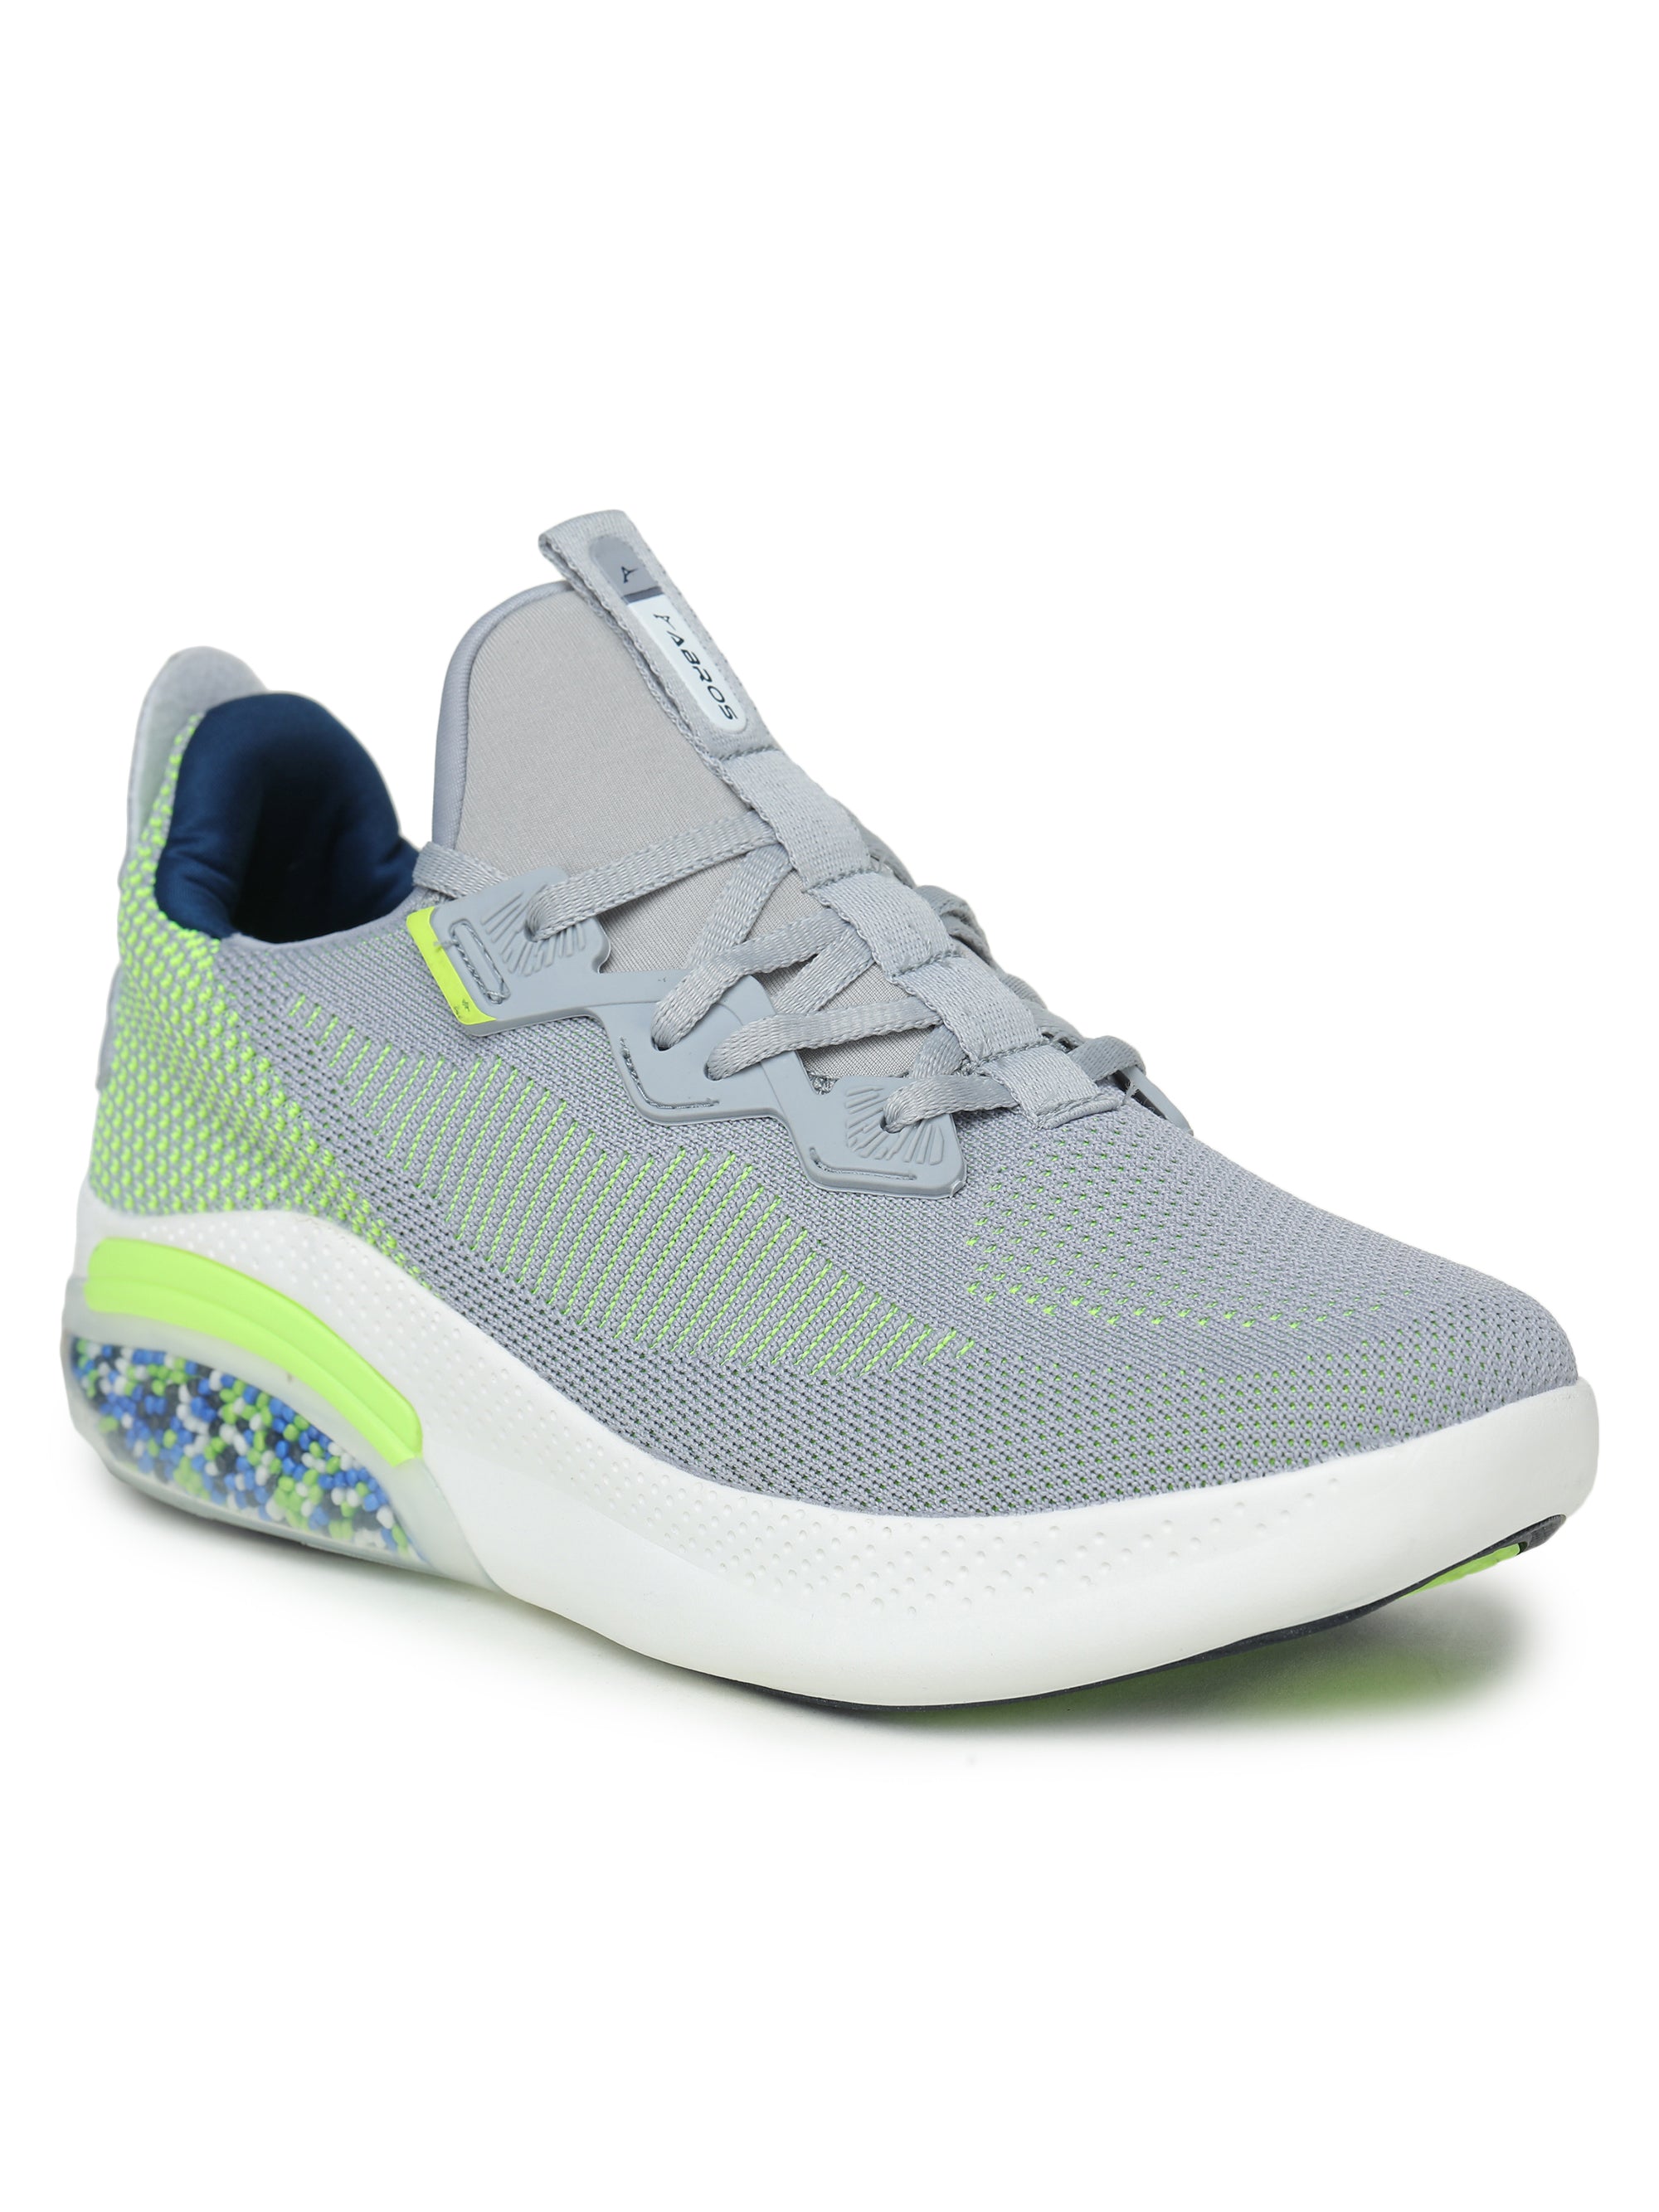 Midland-M Sports Shoes For Men